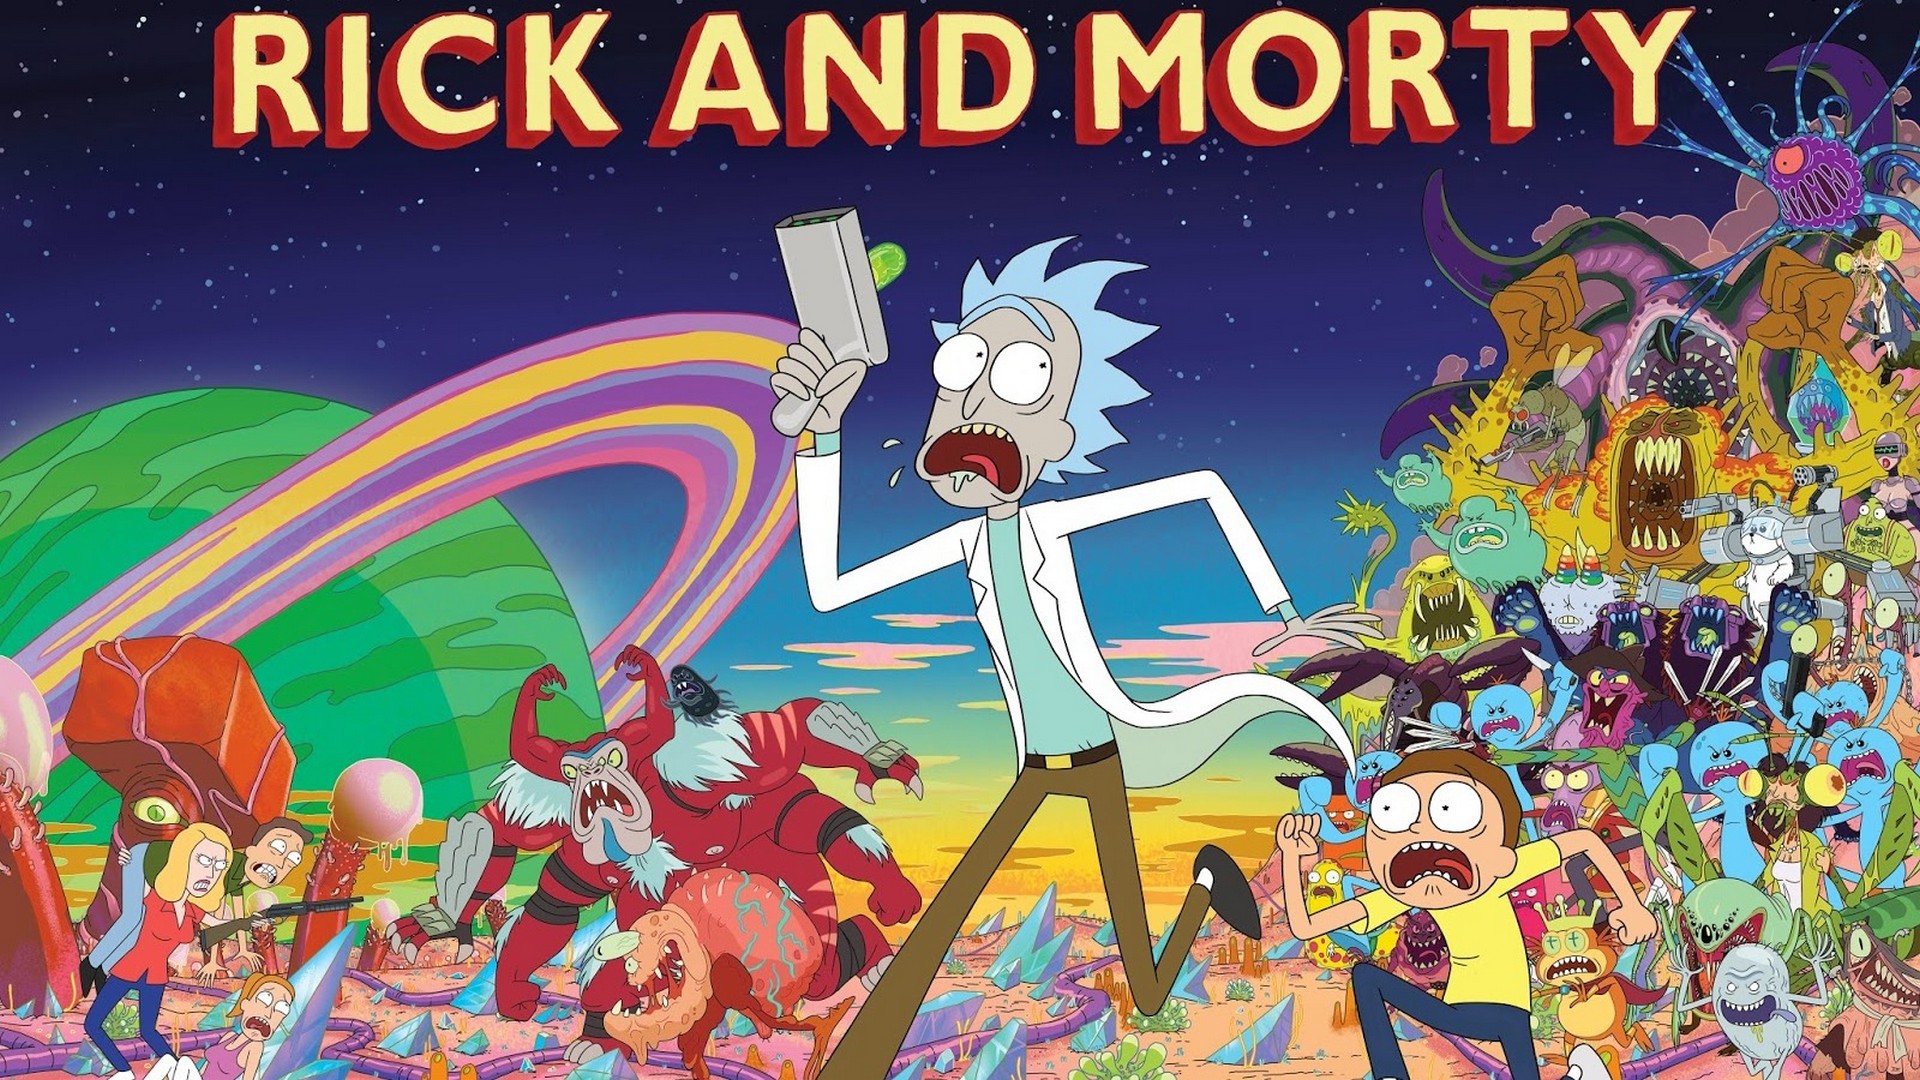 Computer Wallpapers Rick and Morty with image resolution 1920x1080 pixel. You can use this wallpaper as background for your desktop Computer Screensavers, Android or iPhone smartphones